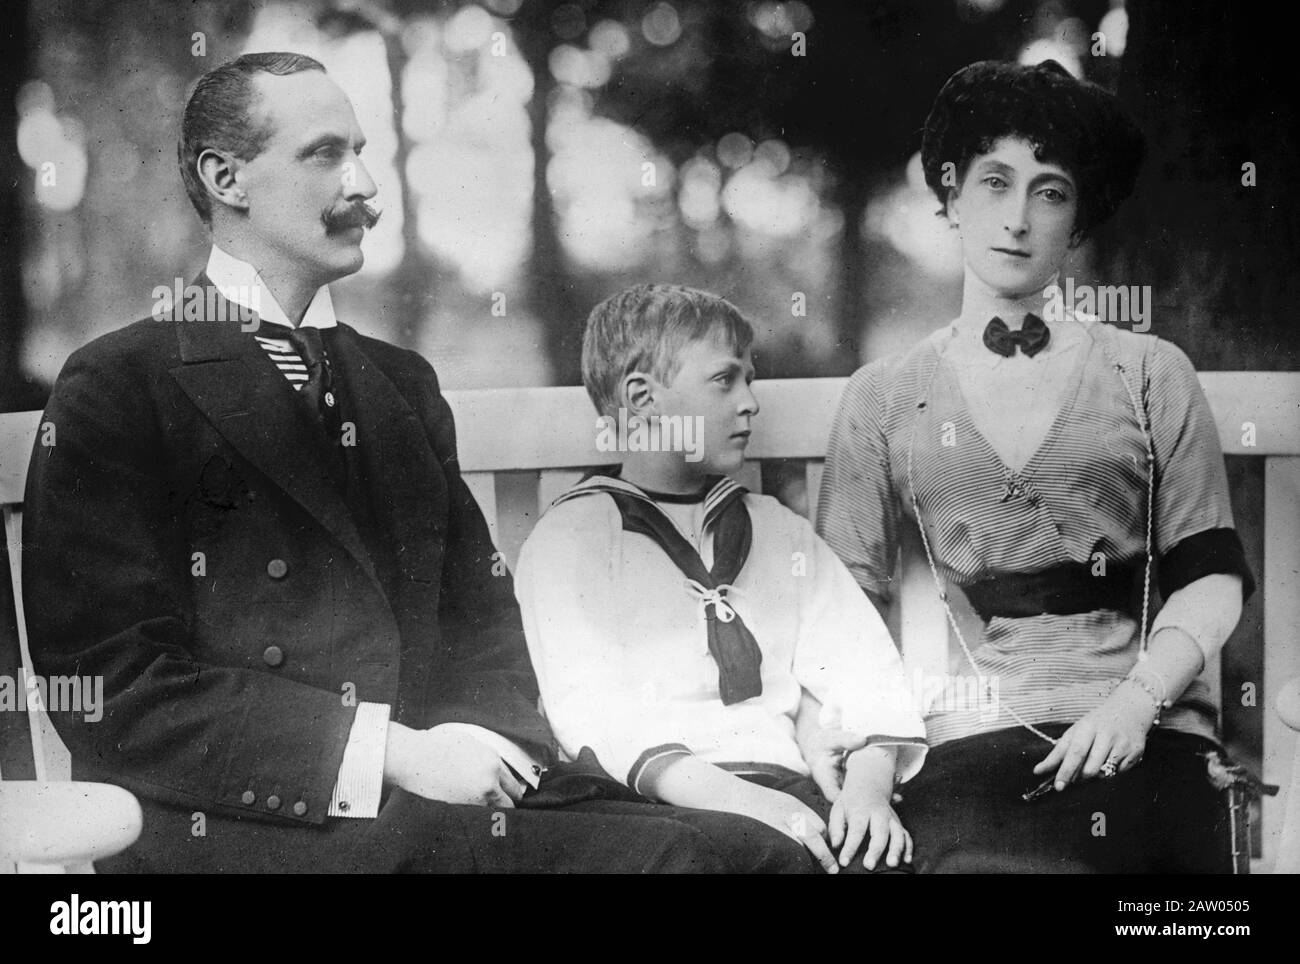 Haakon VII, King of Norway (1872-1957) with his wife, Princess Maud of Wales (1869-1938) and Prince Olav V (1903-1991) who became king of Norway in 1957 ca. 1913 Stock Photo